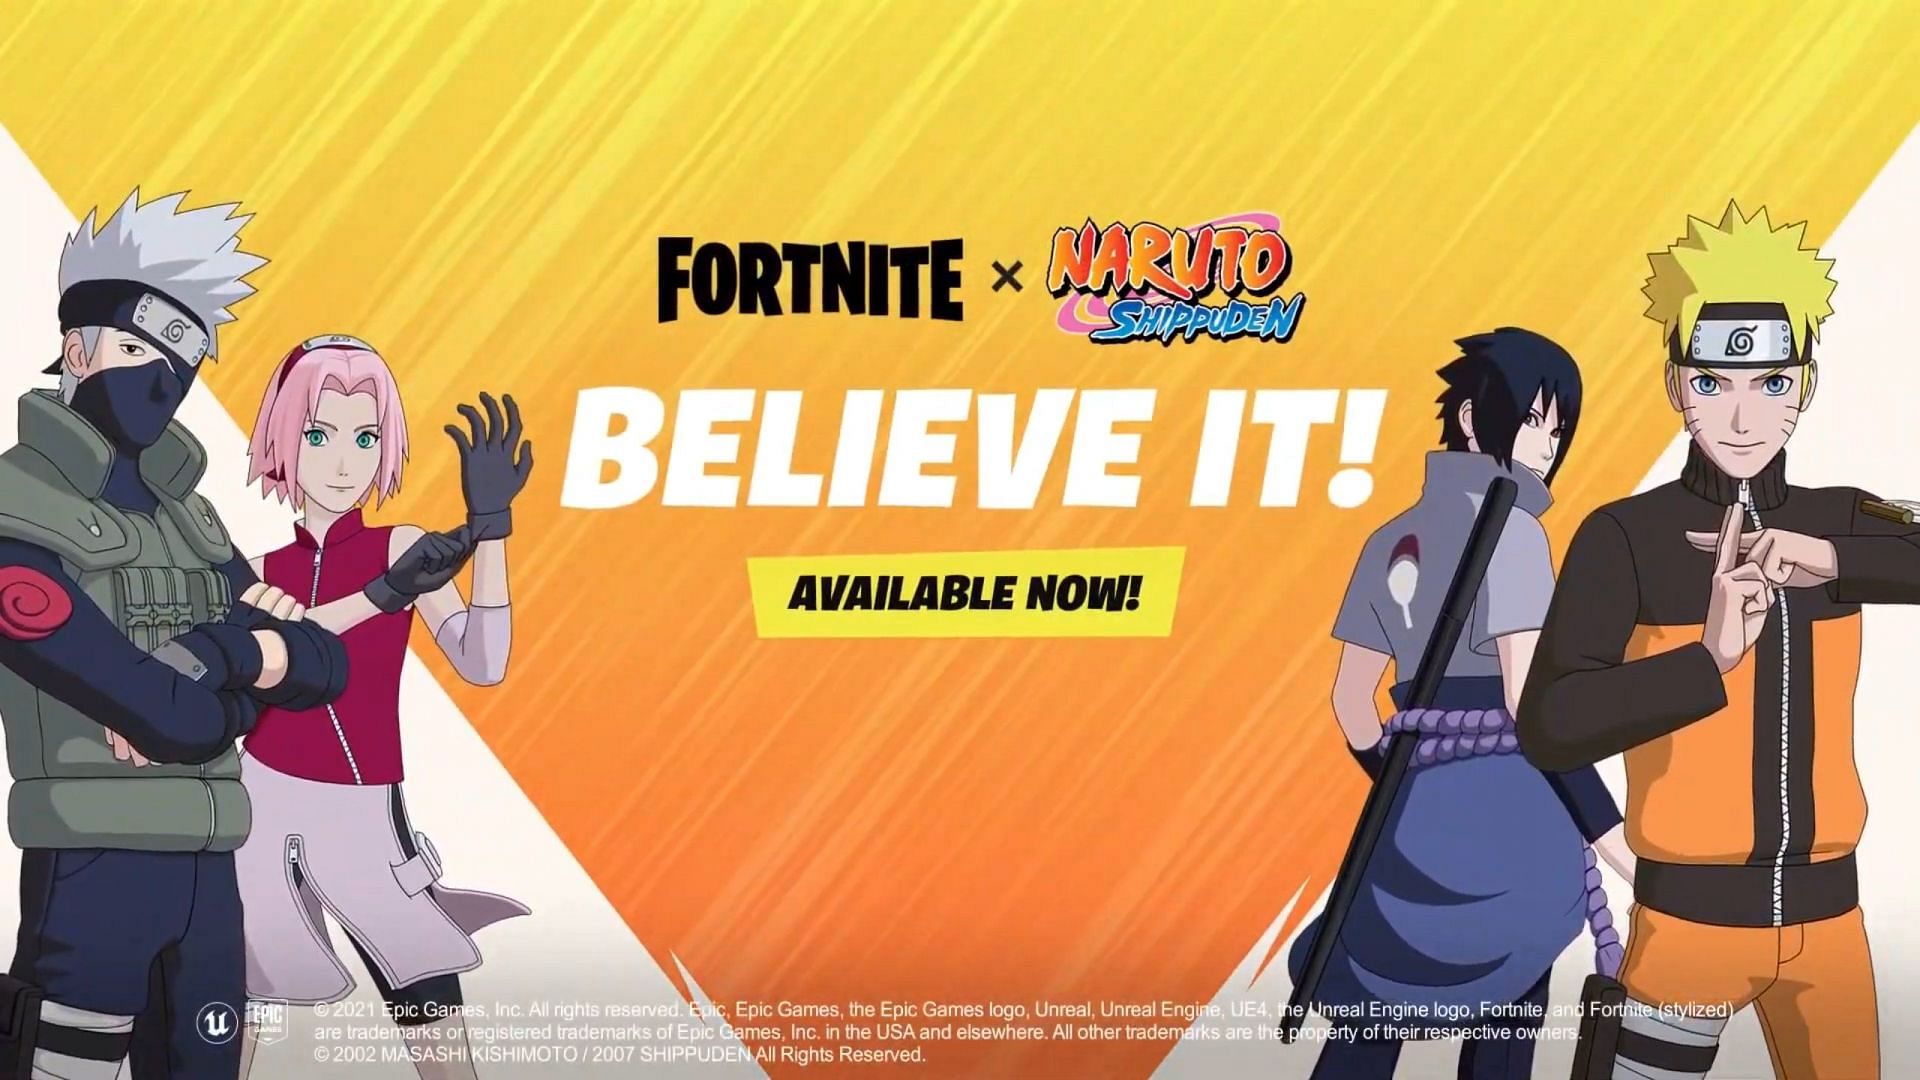 How to get all Fortnite x Naruto cosmetics in Chapter 2 Season 8